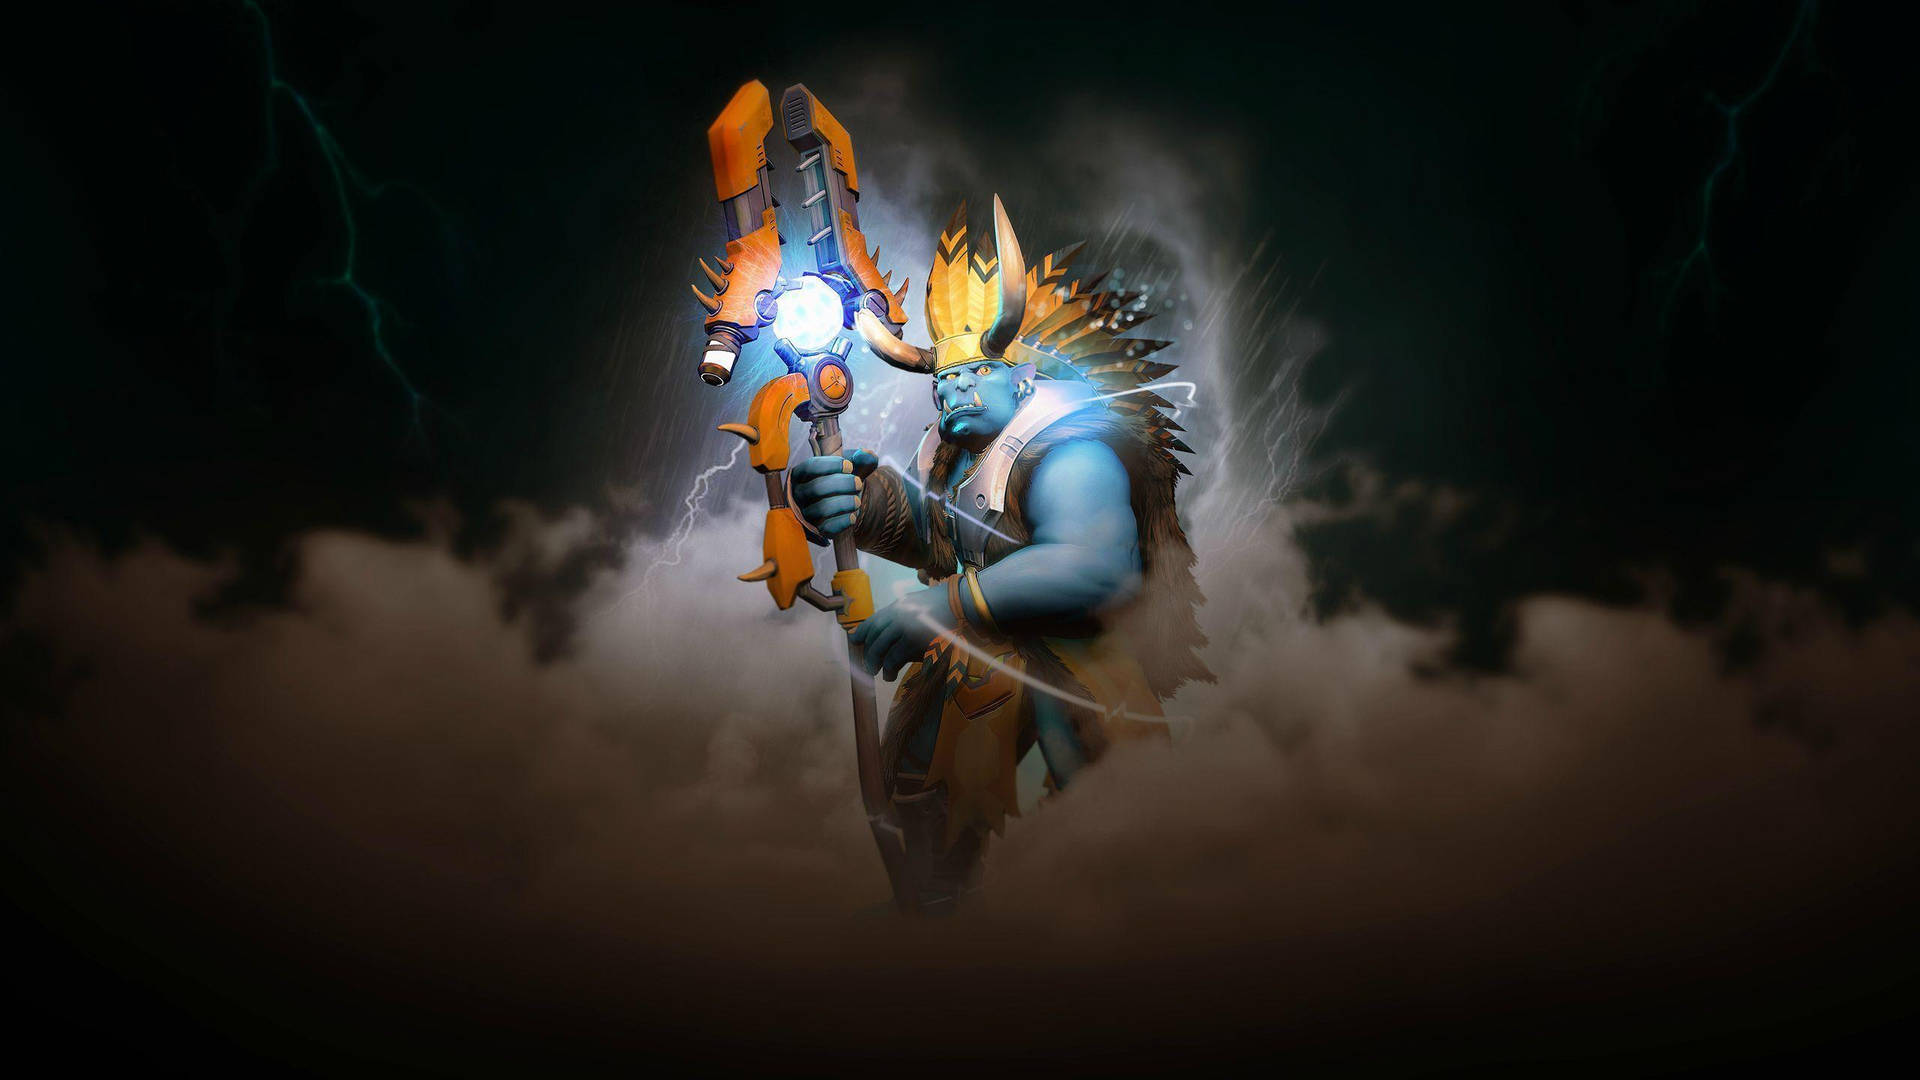 Video Game Paladins Grohk With Arc Staff Wallpaper